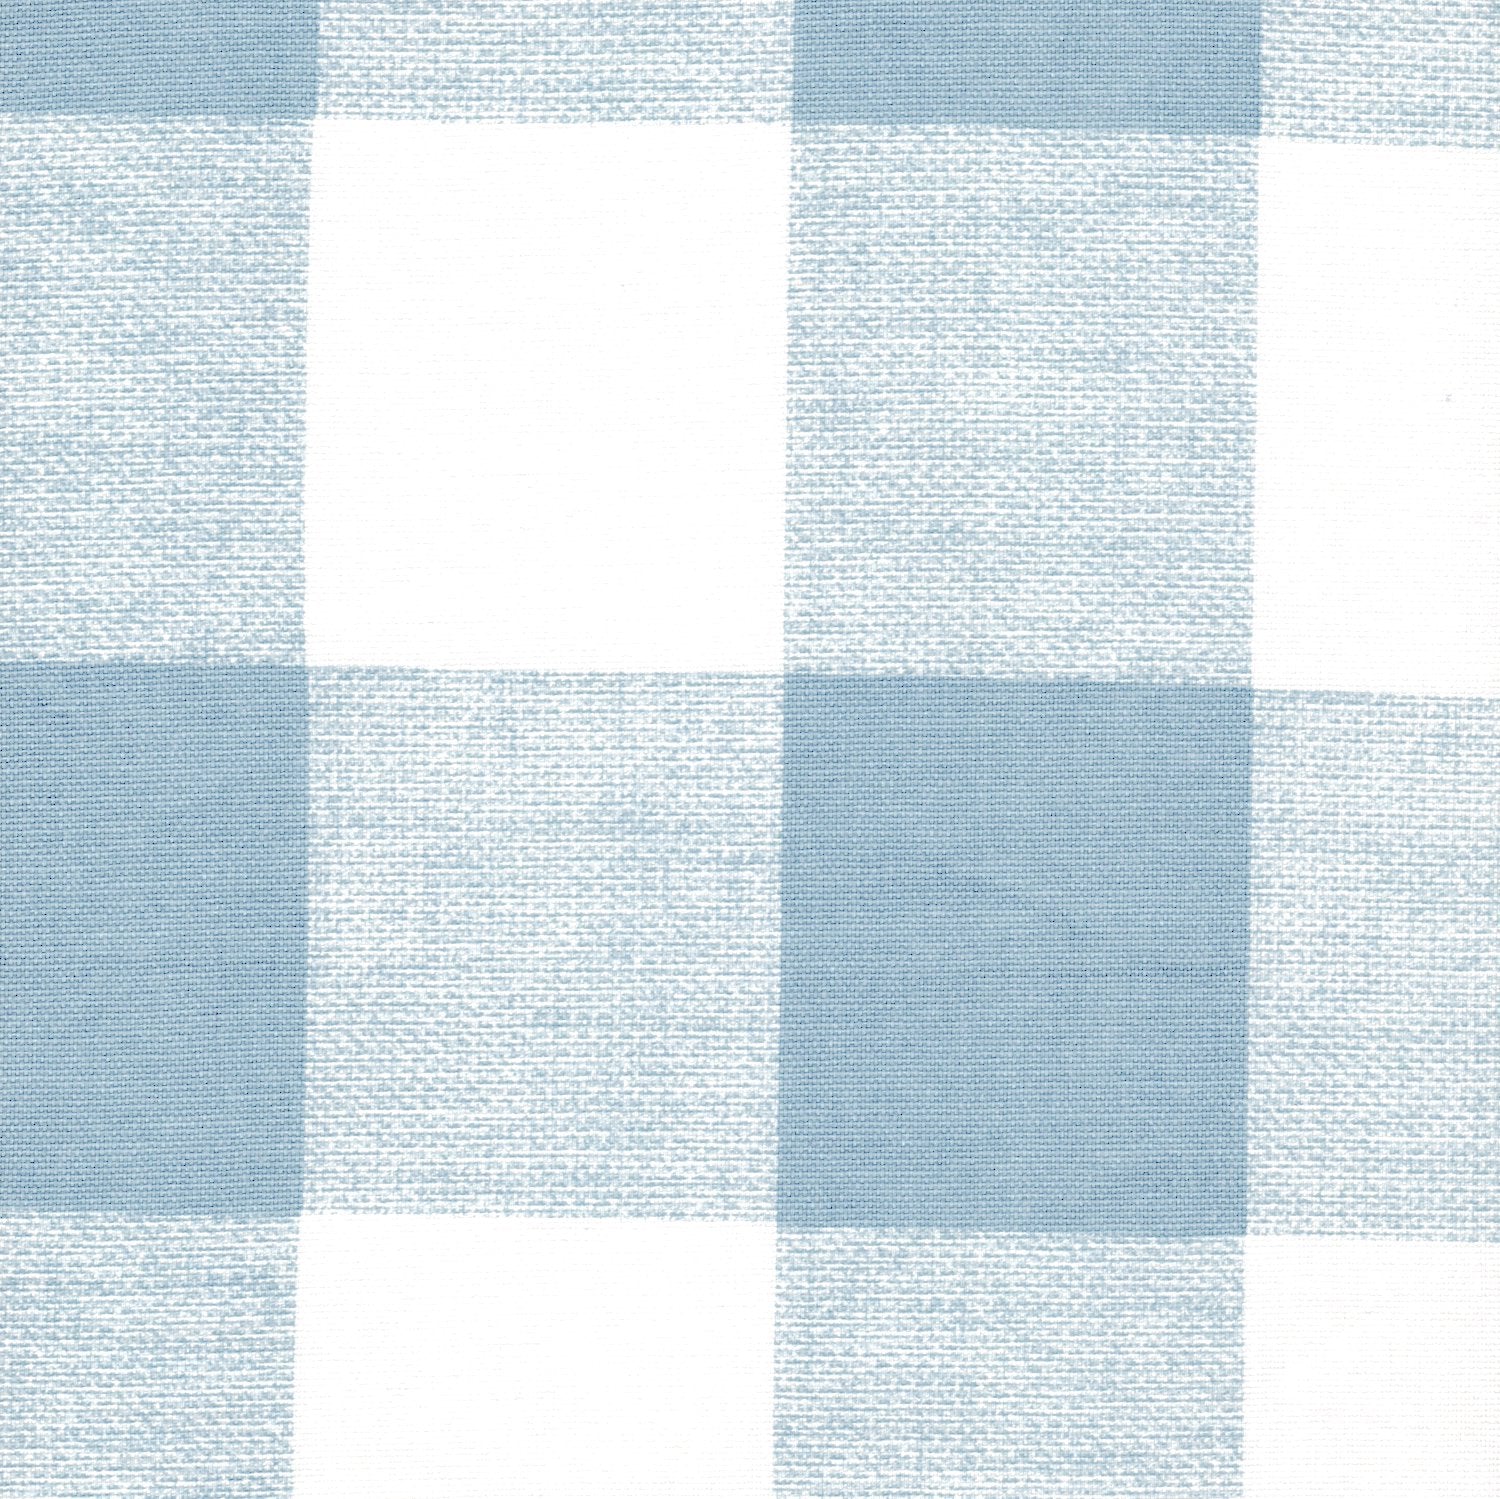 duvet cover in anderson cashmere light blue buffalo check